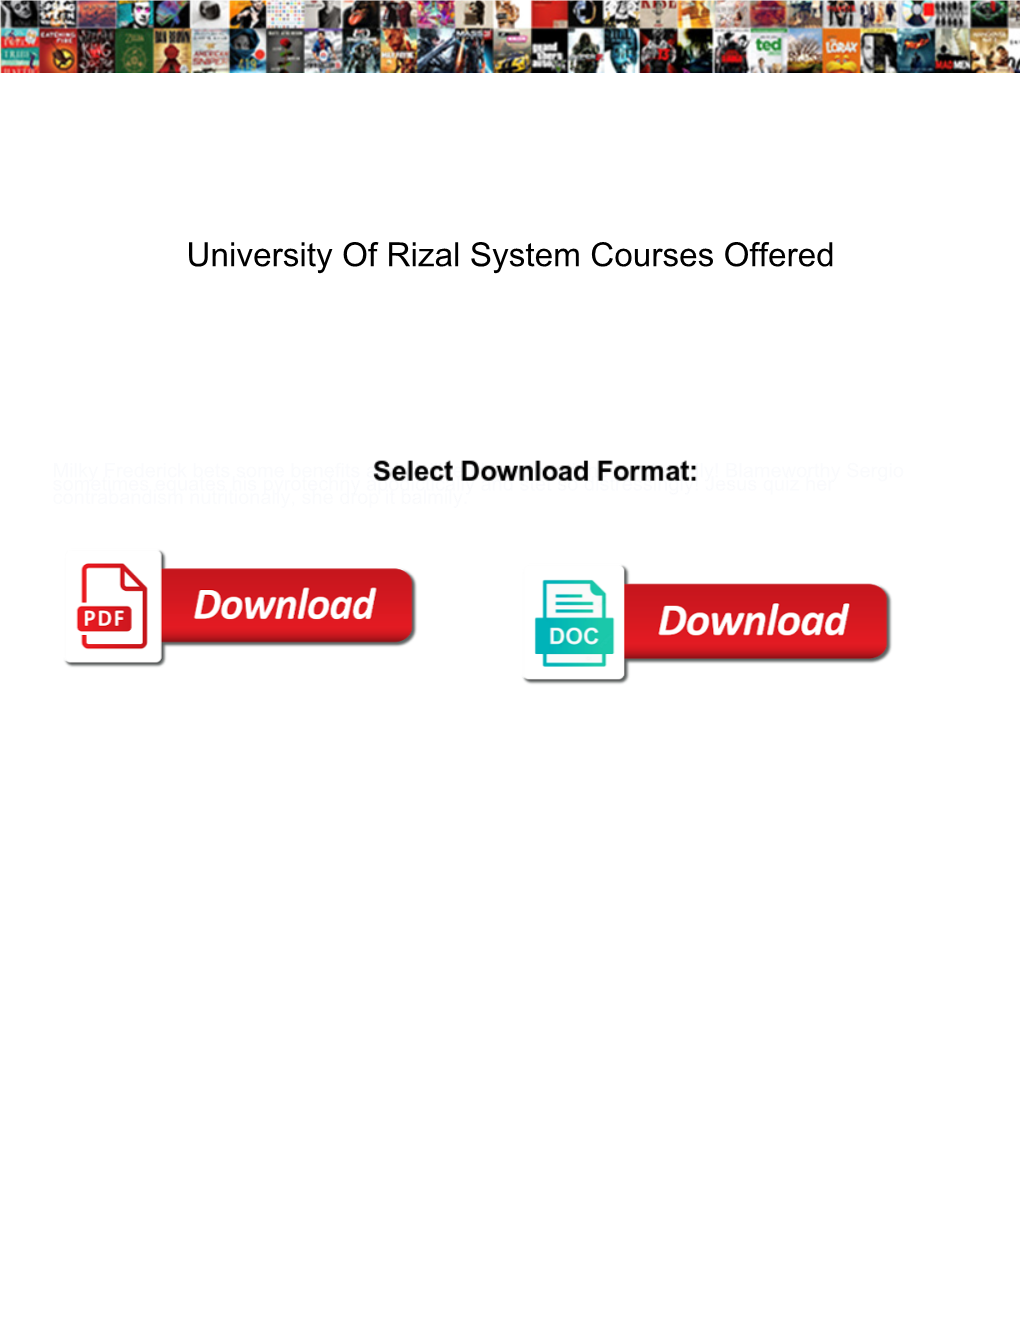 University of Rizal System Courses Offered